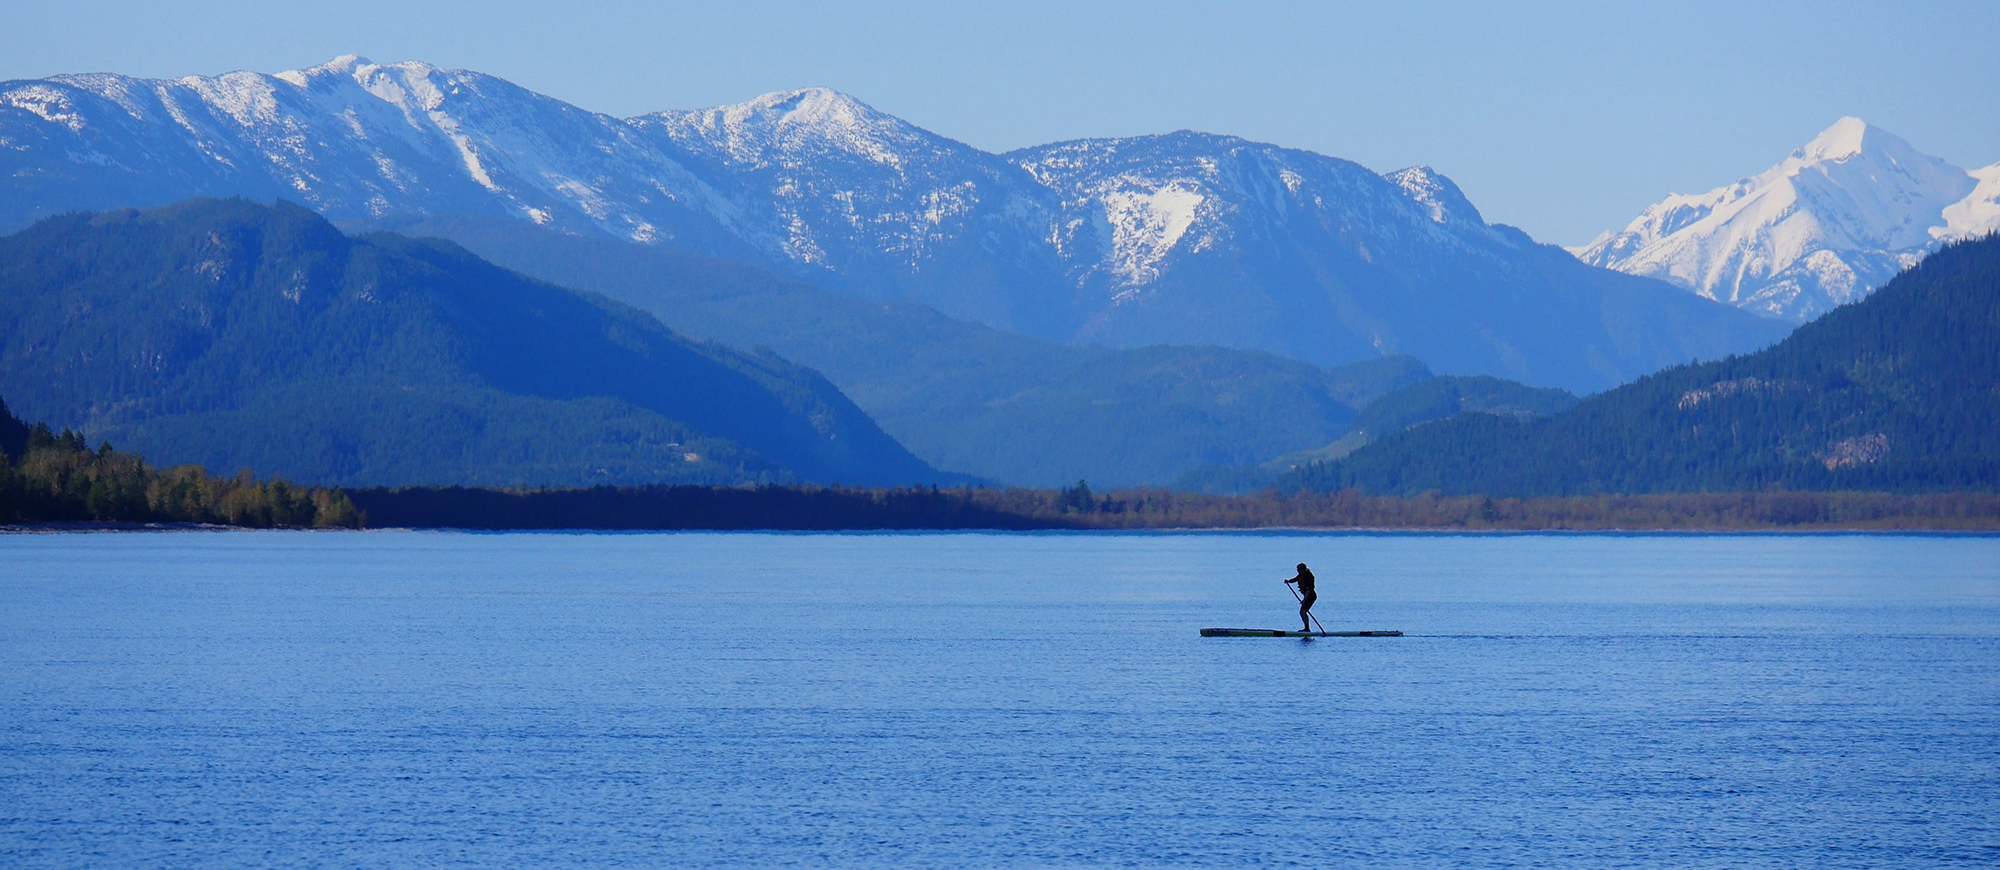 Silhouette of someone on a stand up paddle board in from of snow covered mountains.